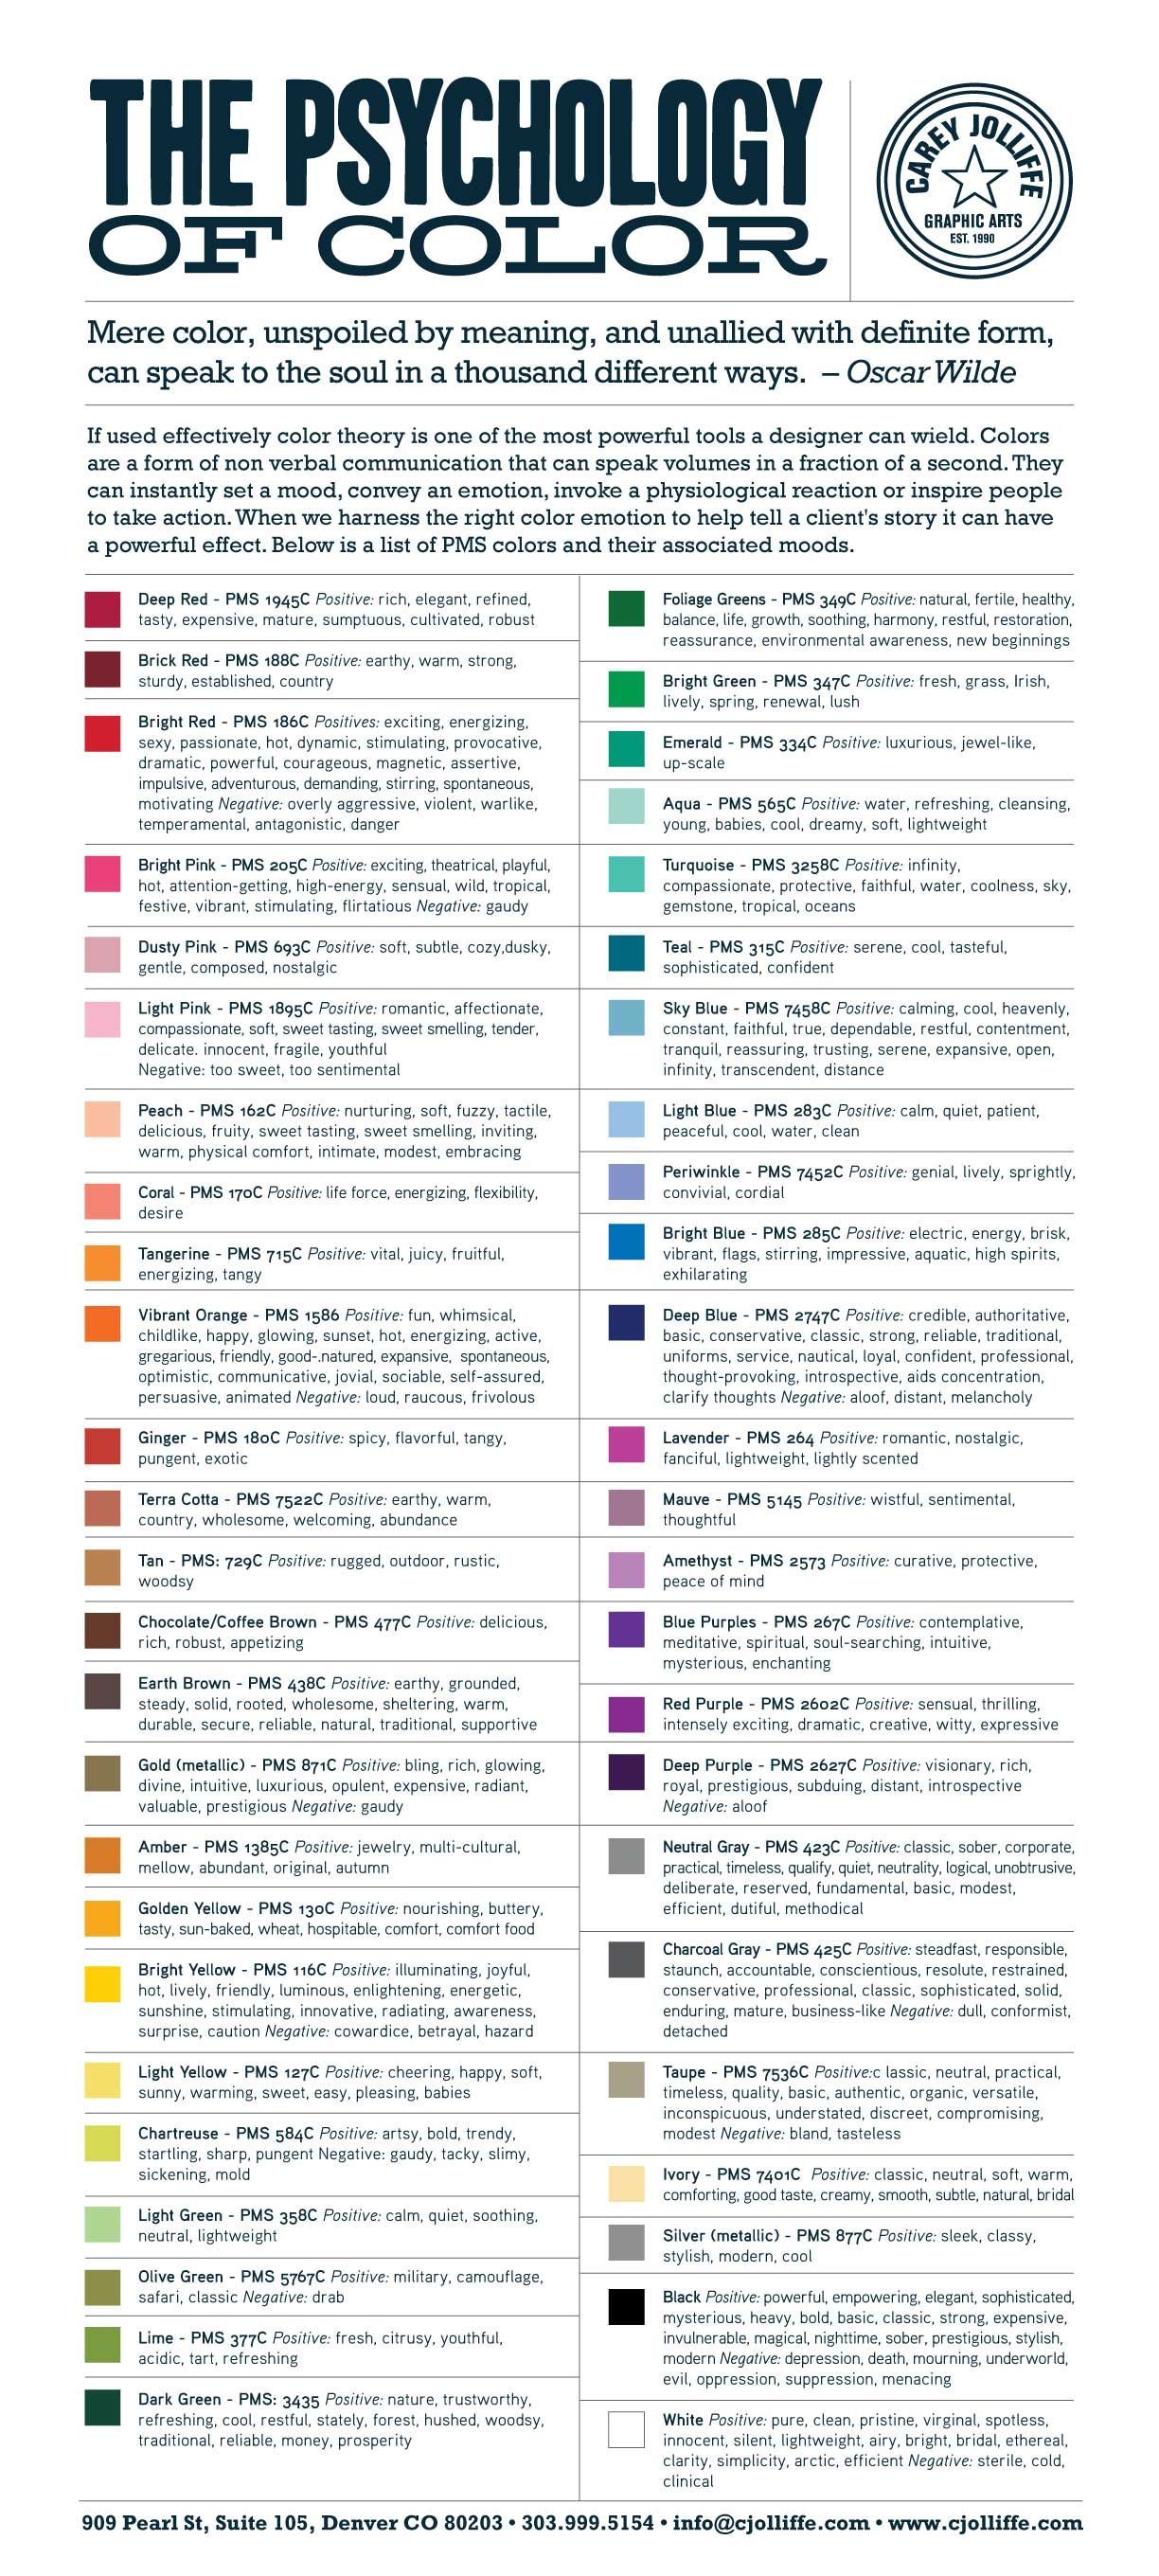 The psychology of color–great for branding